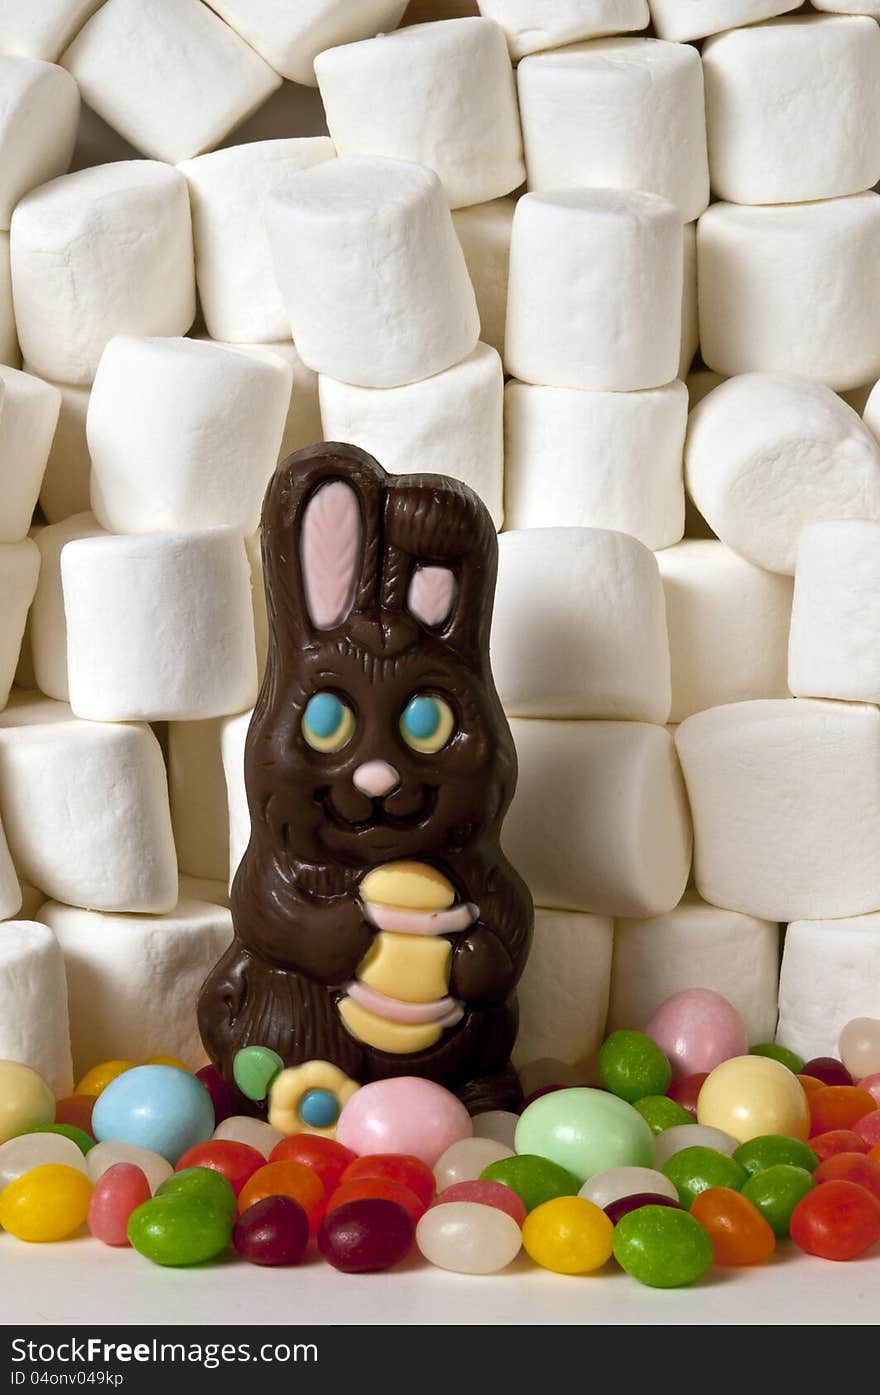 Horizontal of chocolate rabbit easter candy and background of marshmallows